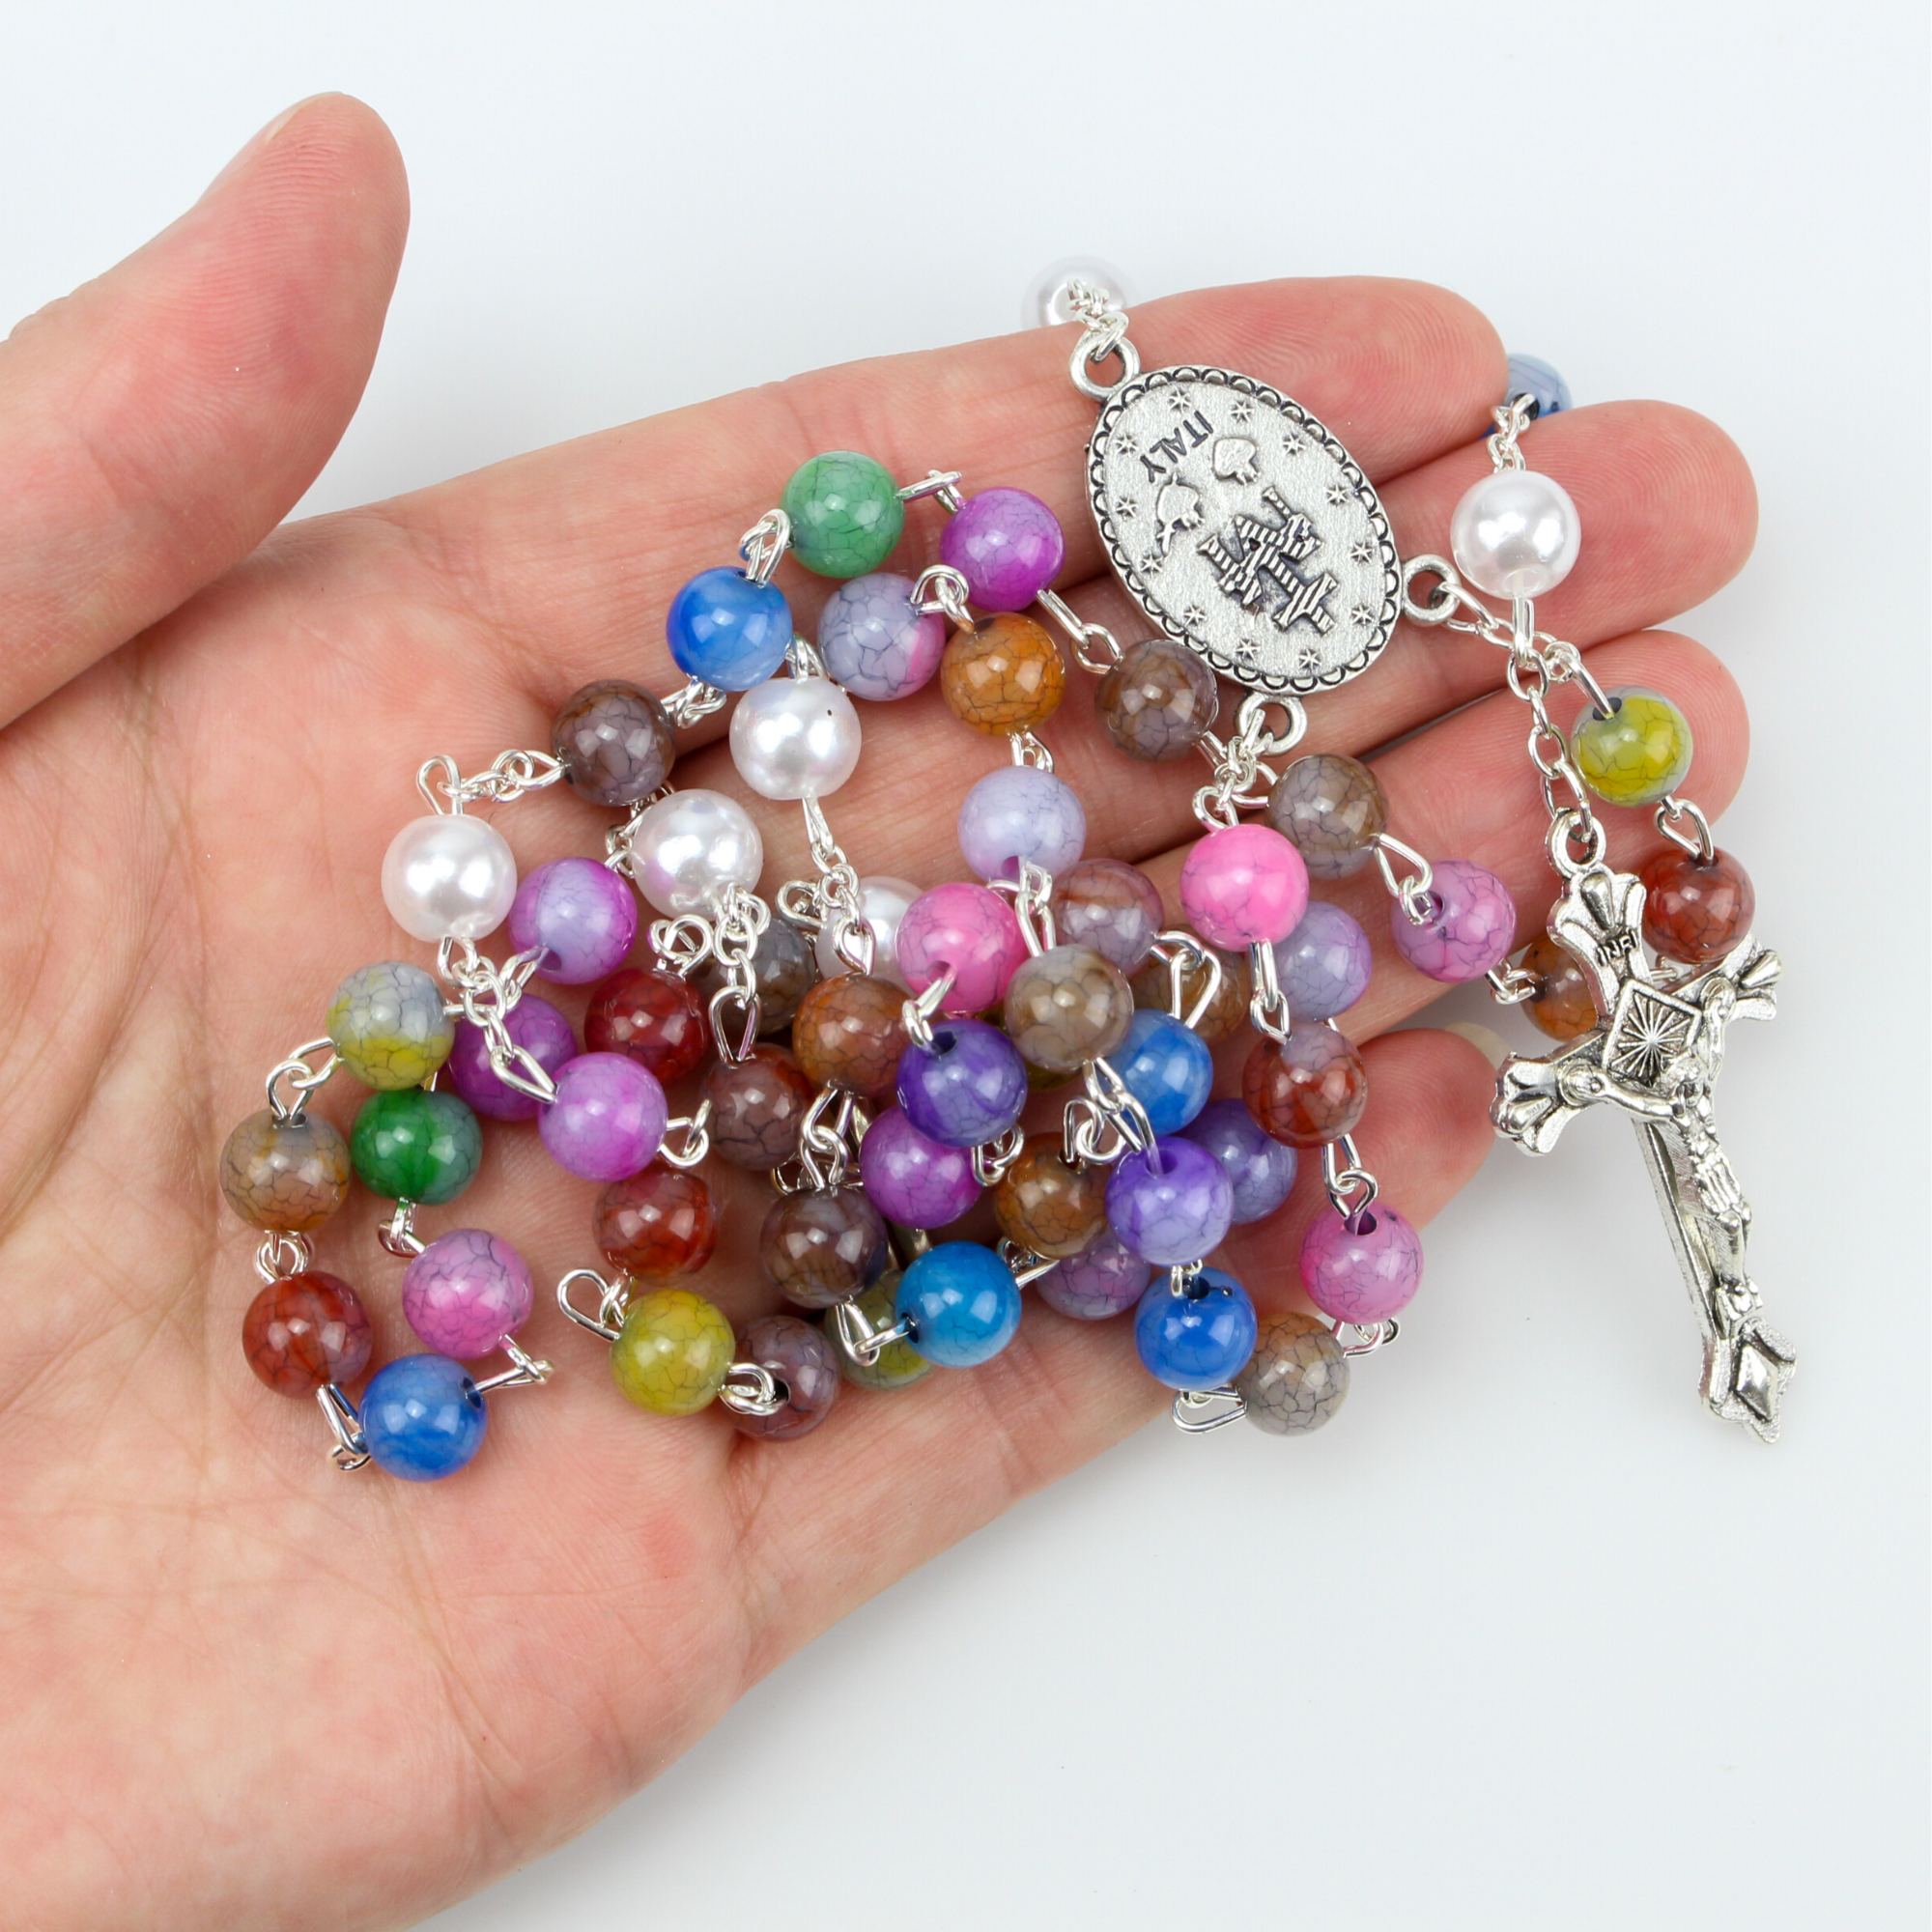 five decade rosary with multi-colored acrylic beads and miraculous medal centerpiece